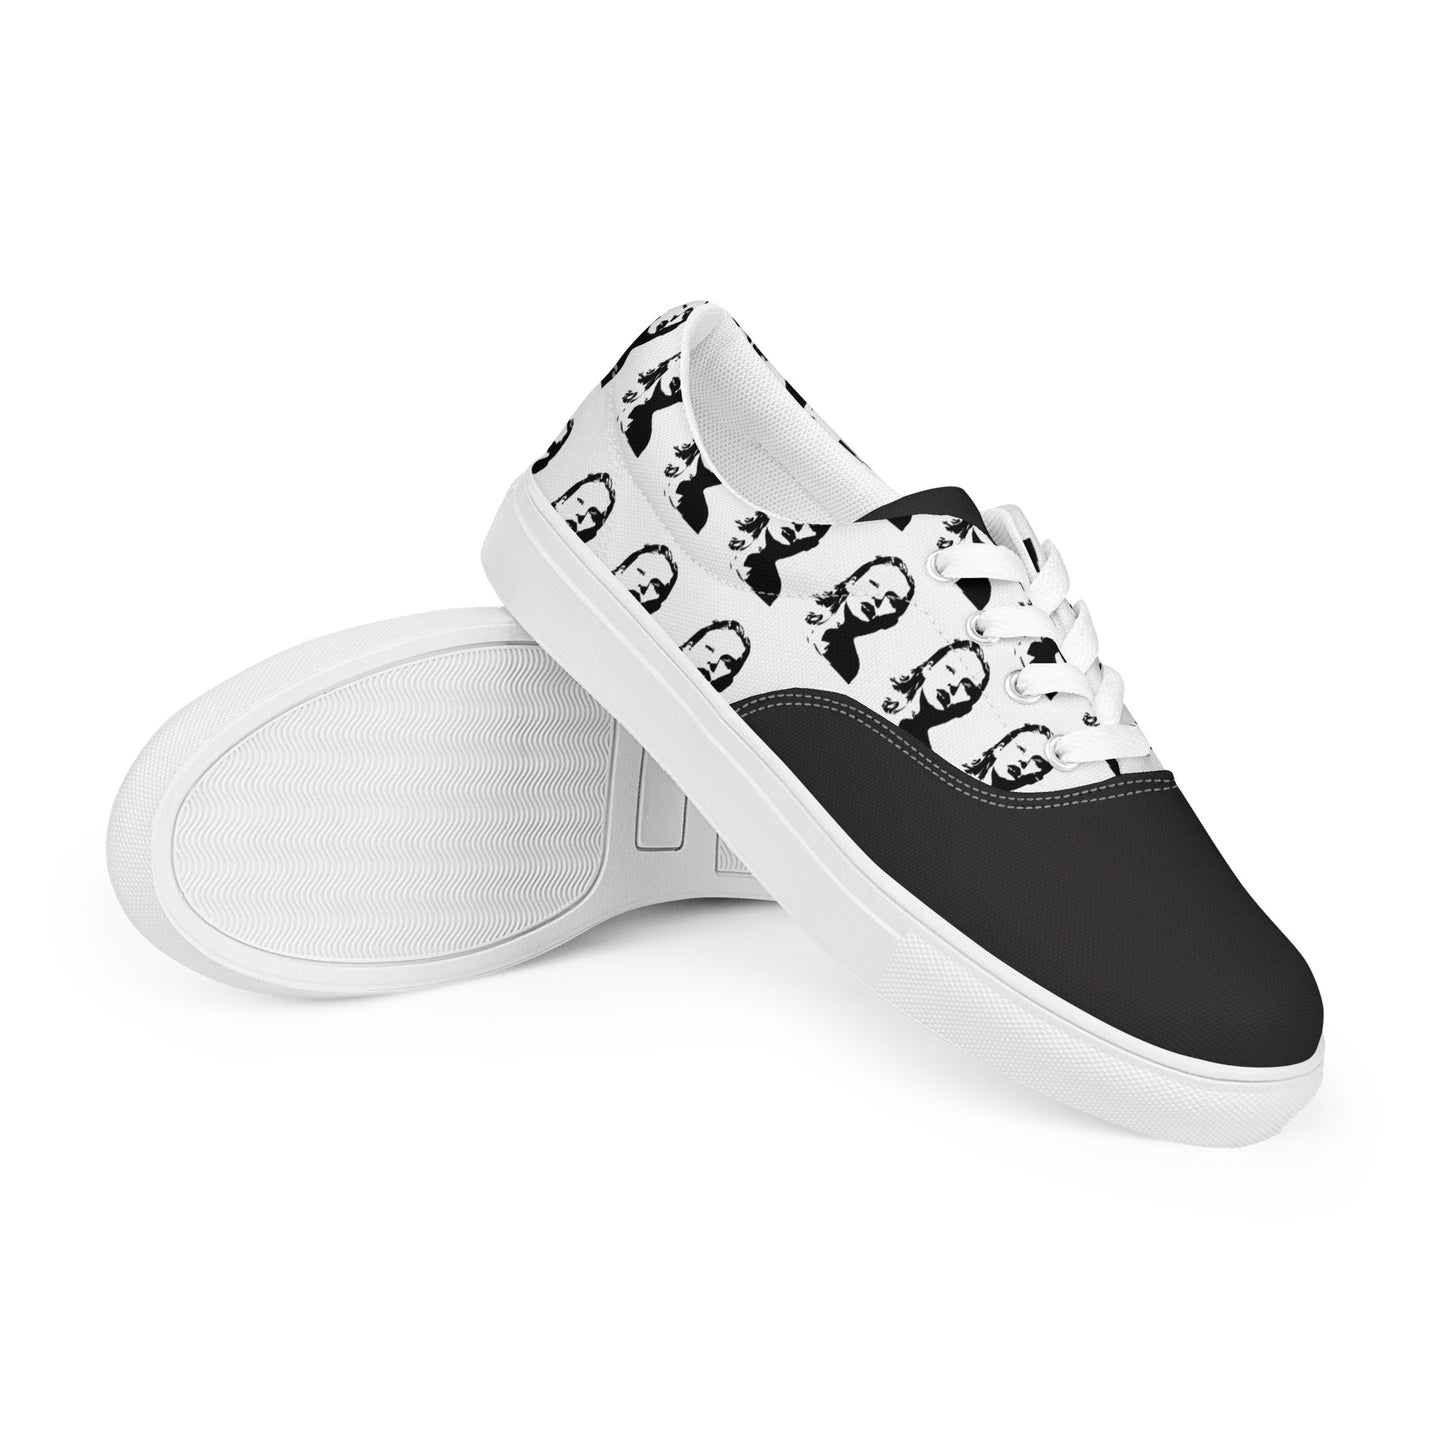 Swift Pattern Black - Inspired By Taylor Swift - Sustainably Made Men’s lace-up canvas shoes